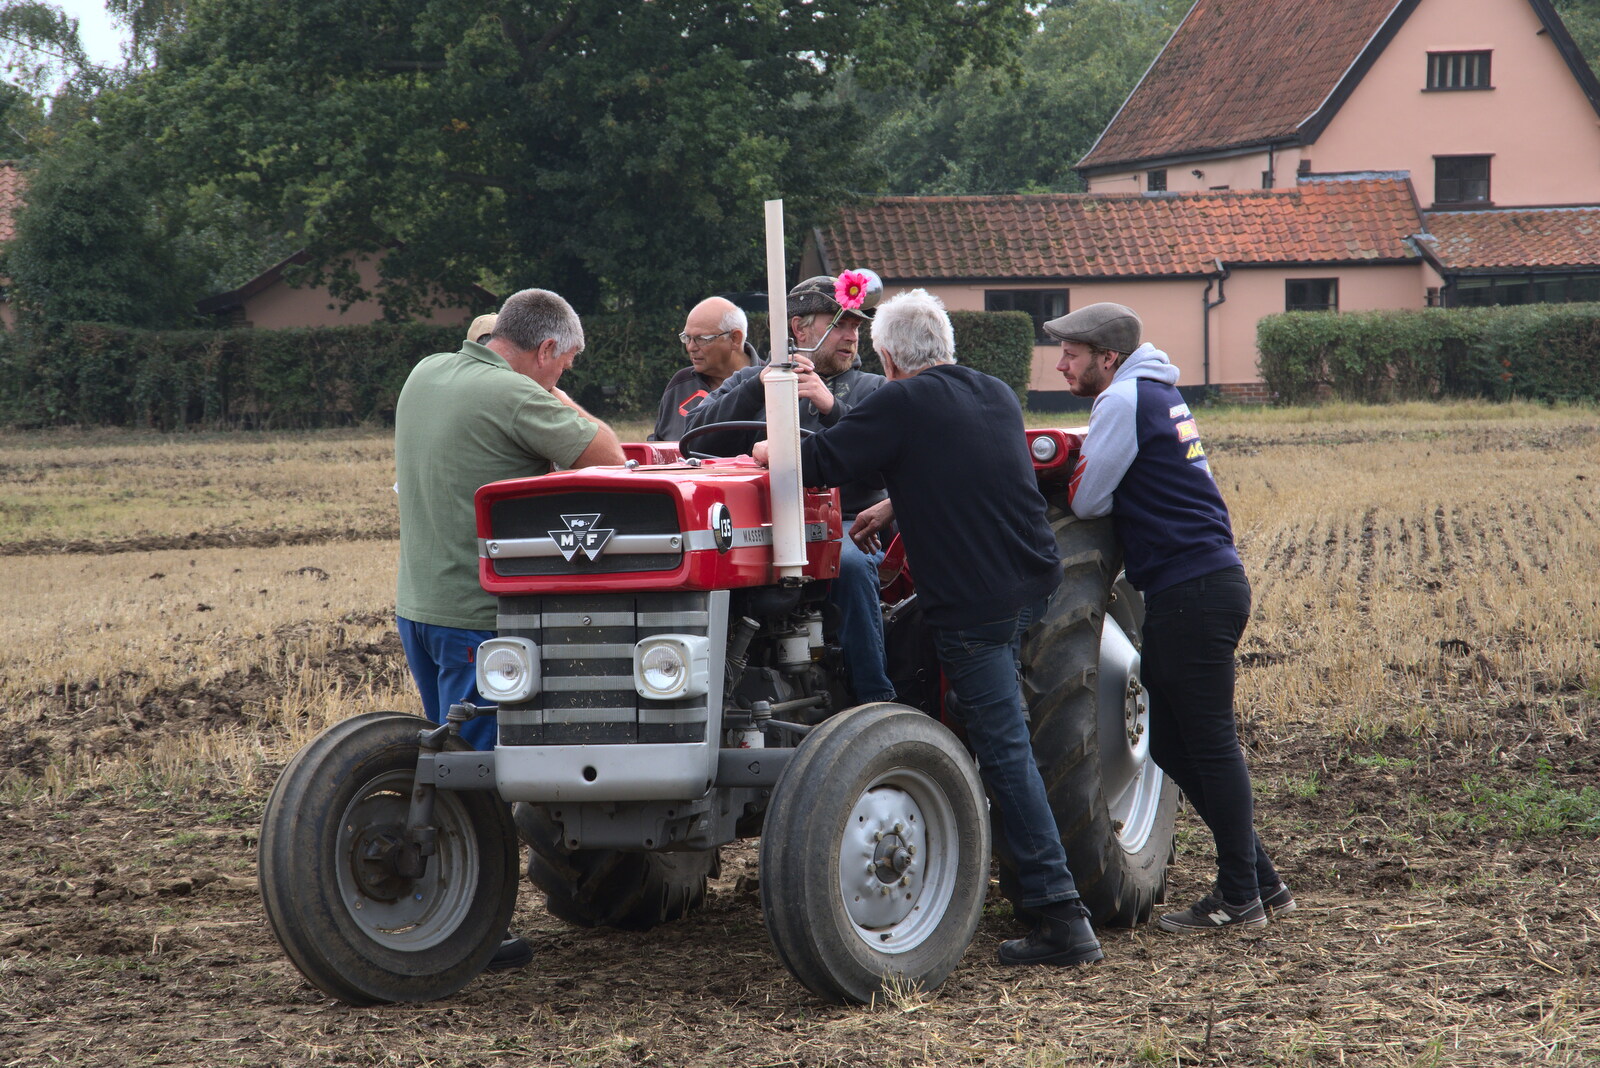 There's a conference over one of the tractors from Vintage Tractor Ploughing, Thrandeston, Suffolk - 26th September 2021